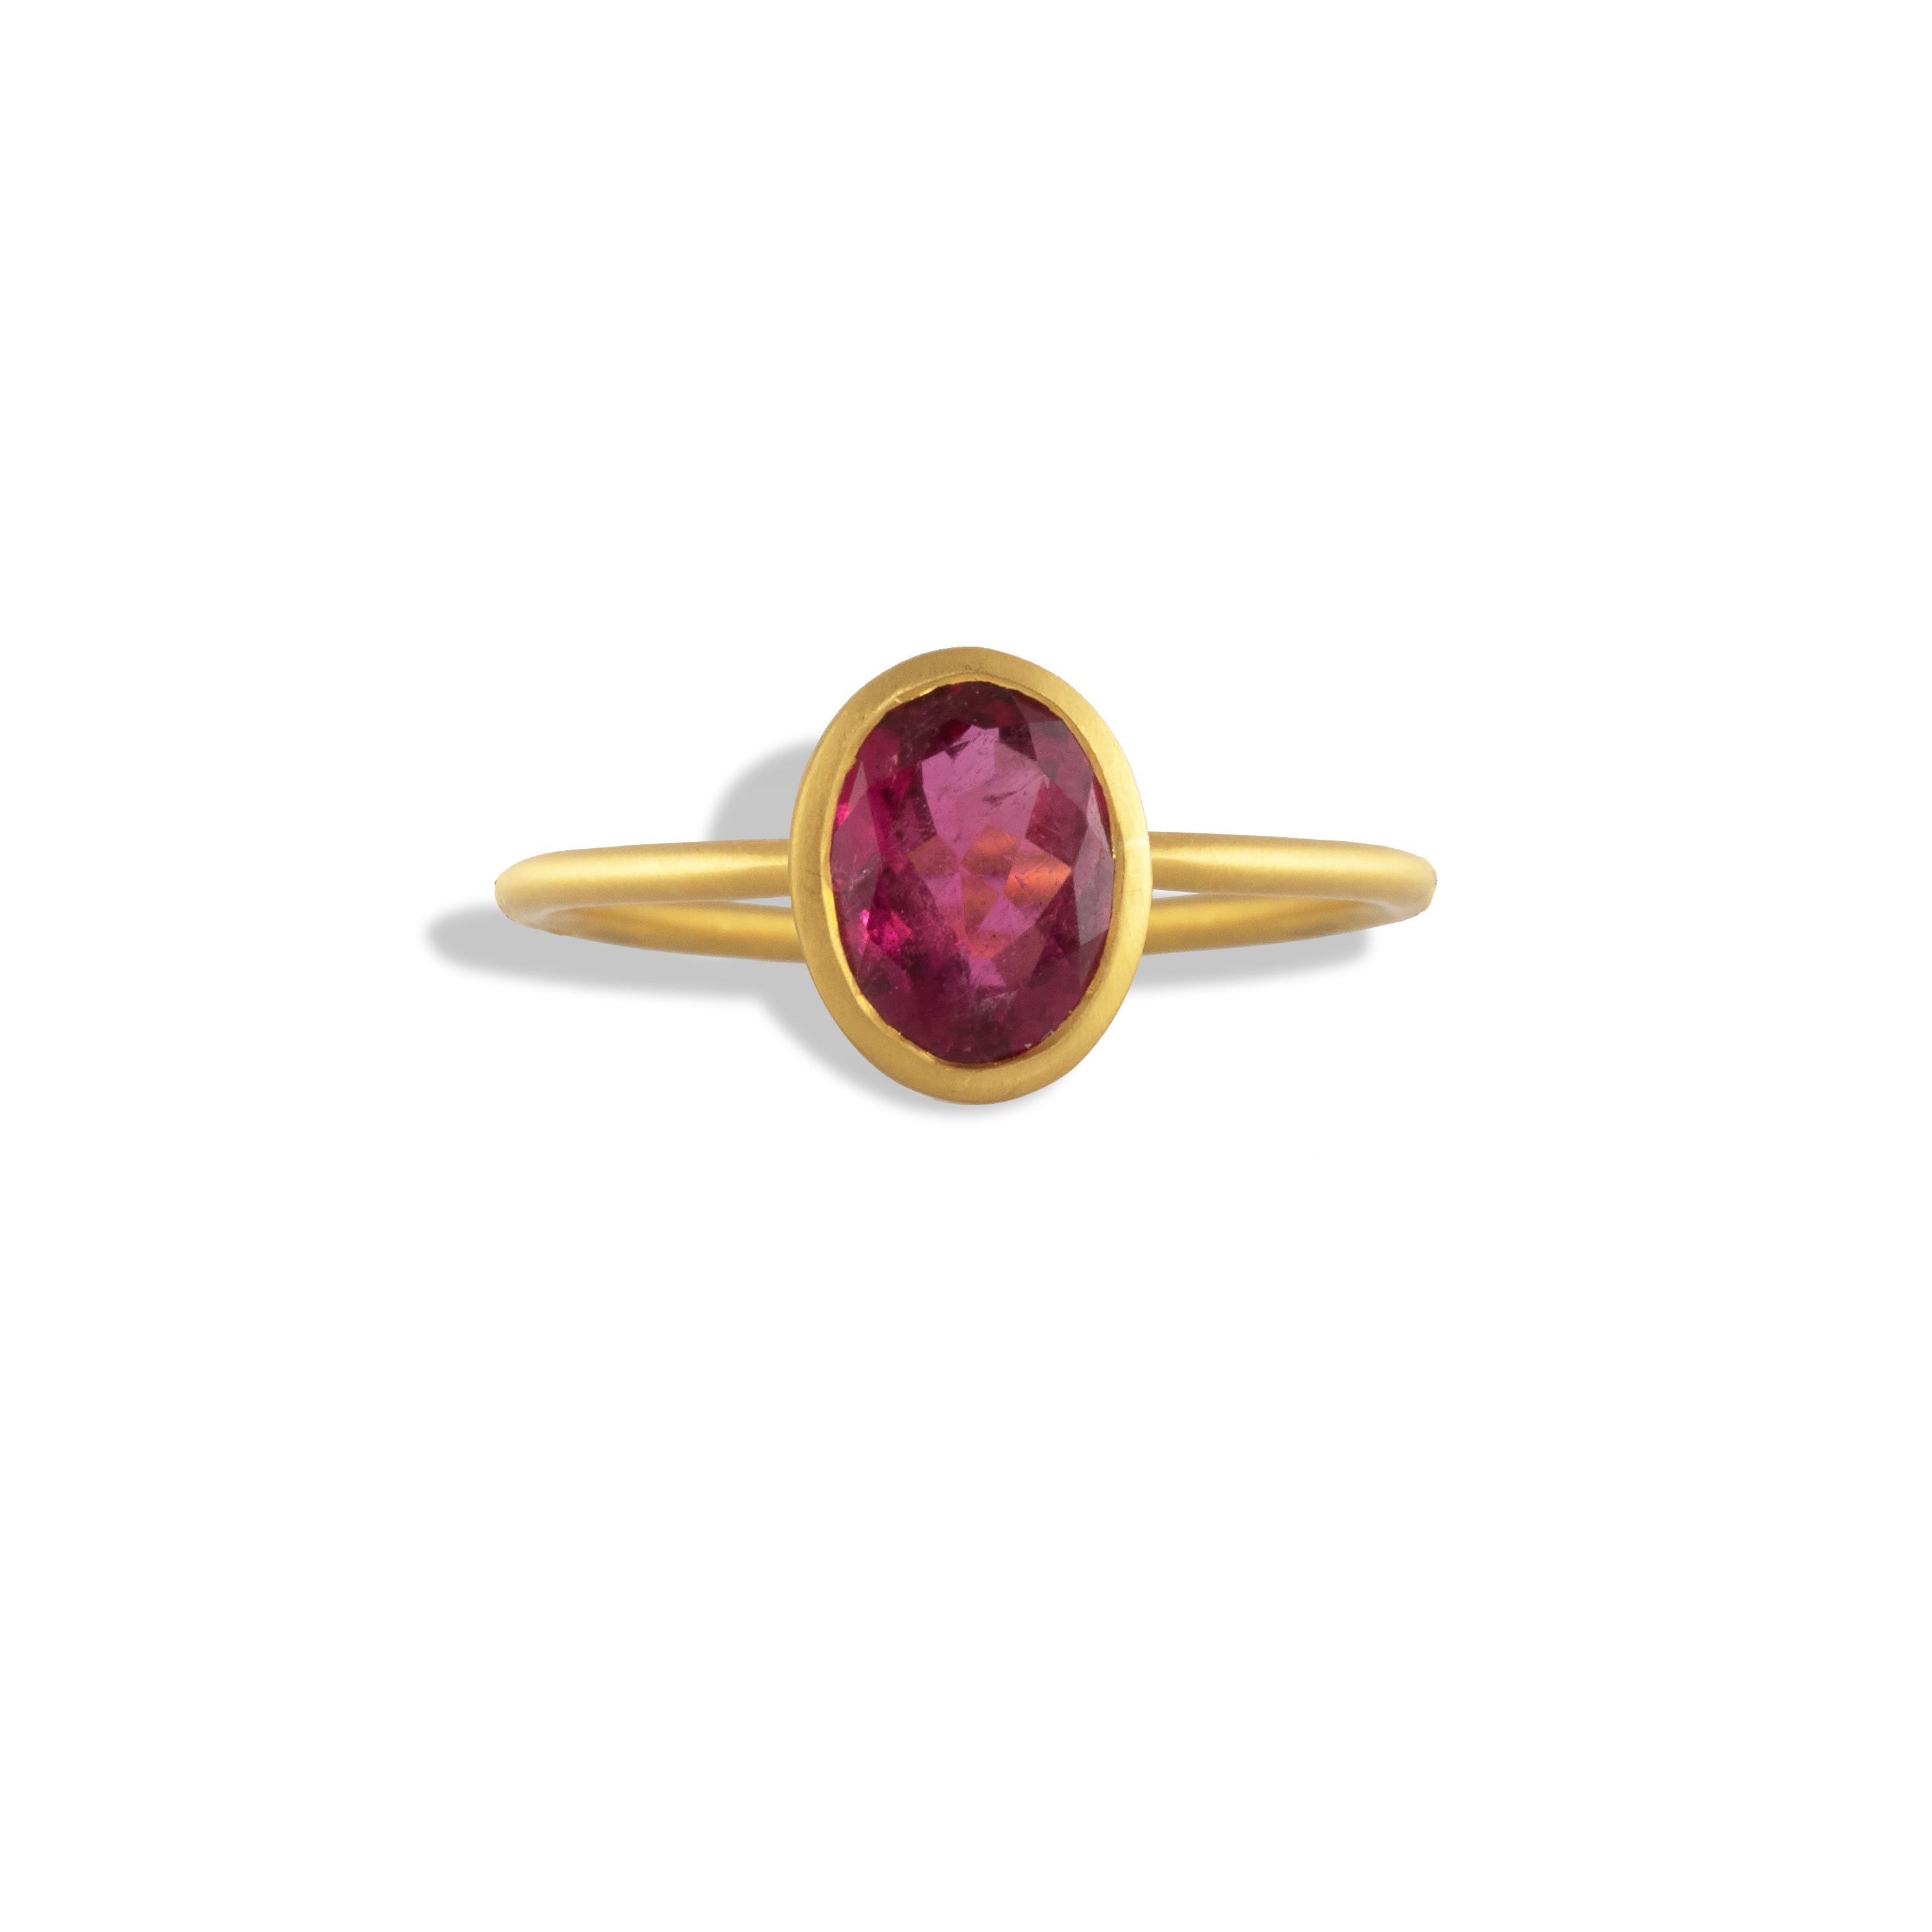 This ring features a 1.34 carat Red Spinel gemstone bezel set in 22k gold. Simple and classic.
The ring is size 6.5 but can be sized.
One of a kind. 

According to legend, spinel can help revitalize and bring energy to the owner. It is said to lower